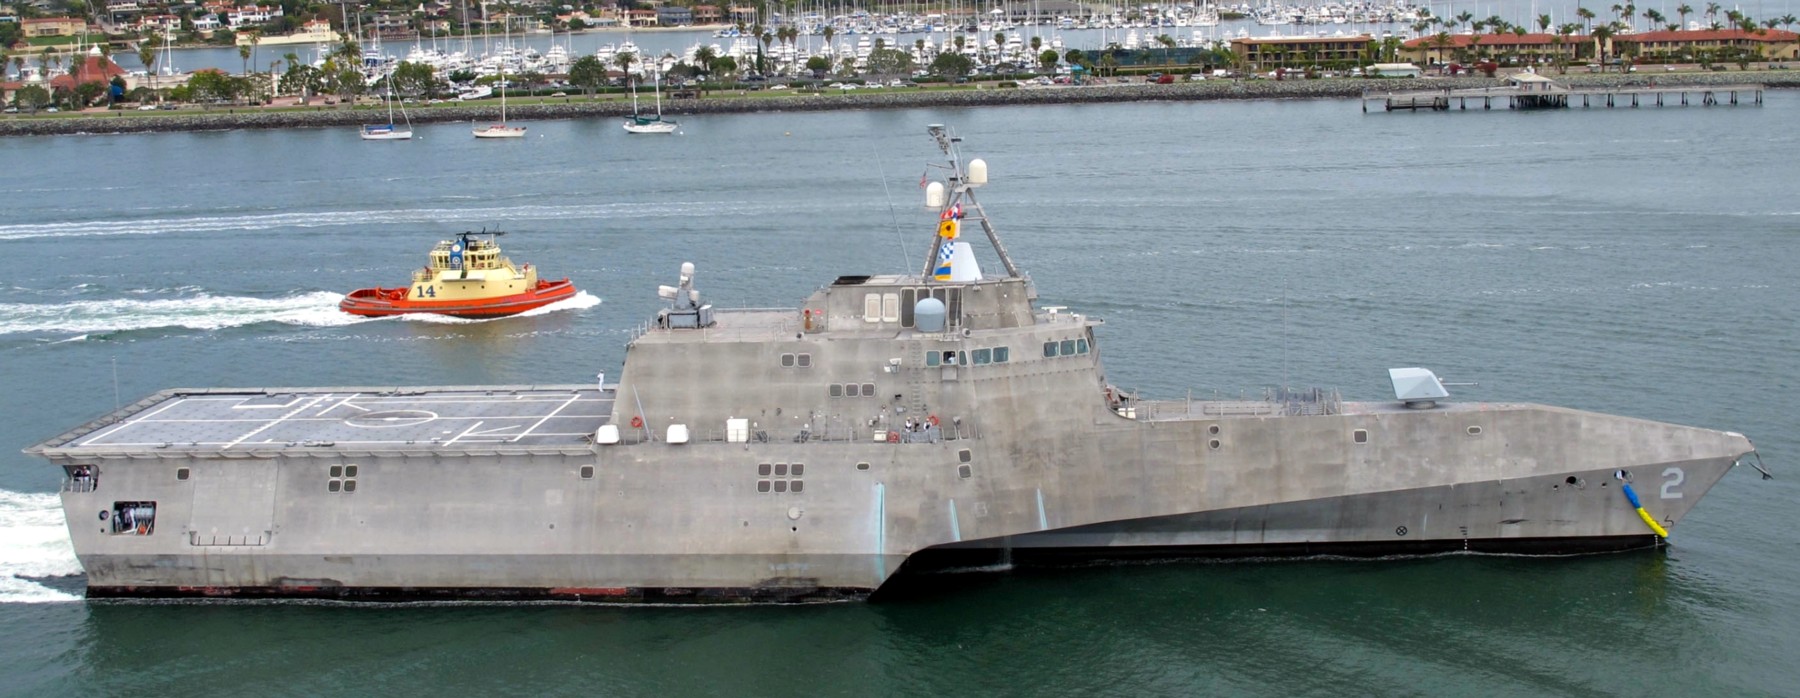 lcs-2 uss independence littoral combat ship us navy class 36a